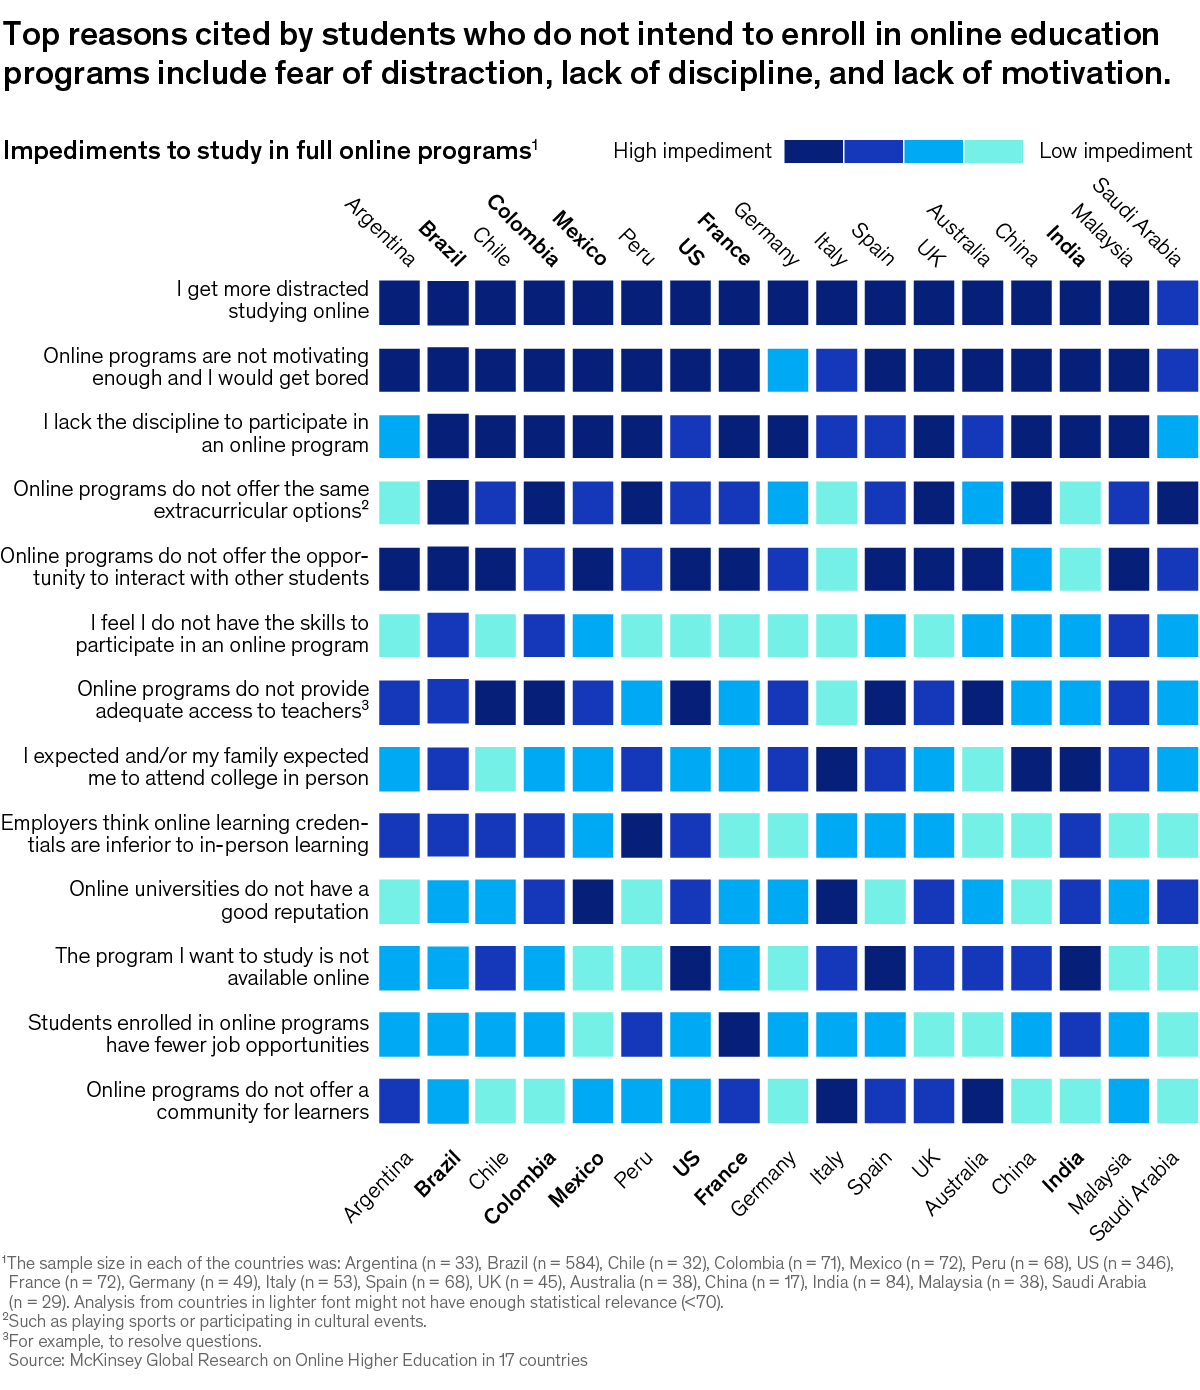 A chart titled “Impediments to study in full online programs,” Click to open the full article on McKinsey.com.